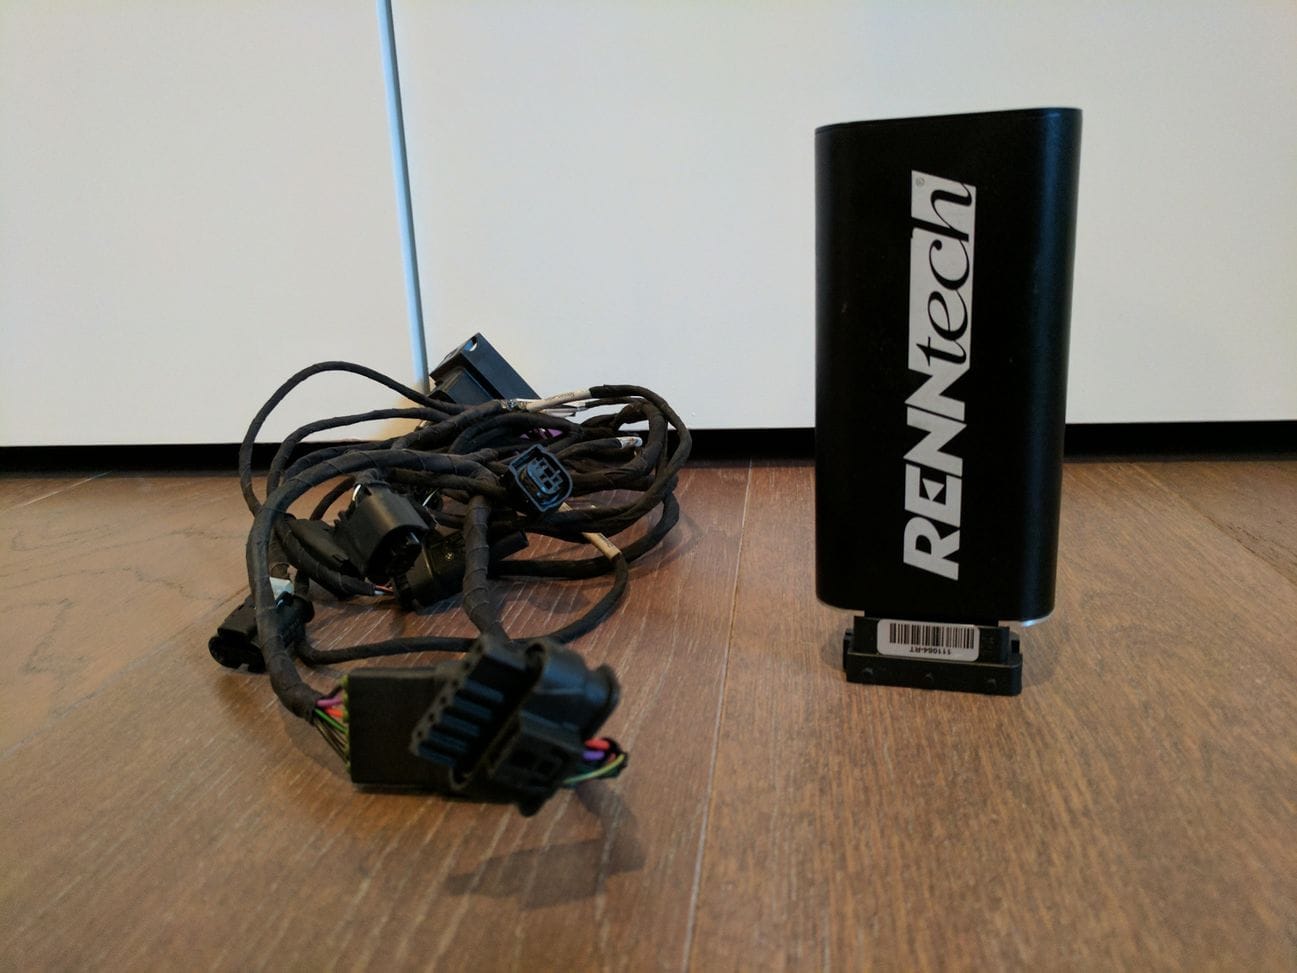 Engine - Power Adders - RENNTECH ECU for sale, $750. Works on any 45 AMG engine. - Used - 2015 to 2018 Mercedes-Benz GLA45 AMG - Bellevue, WA 98004, United States